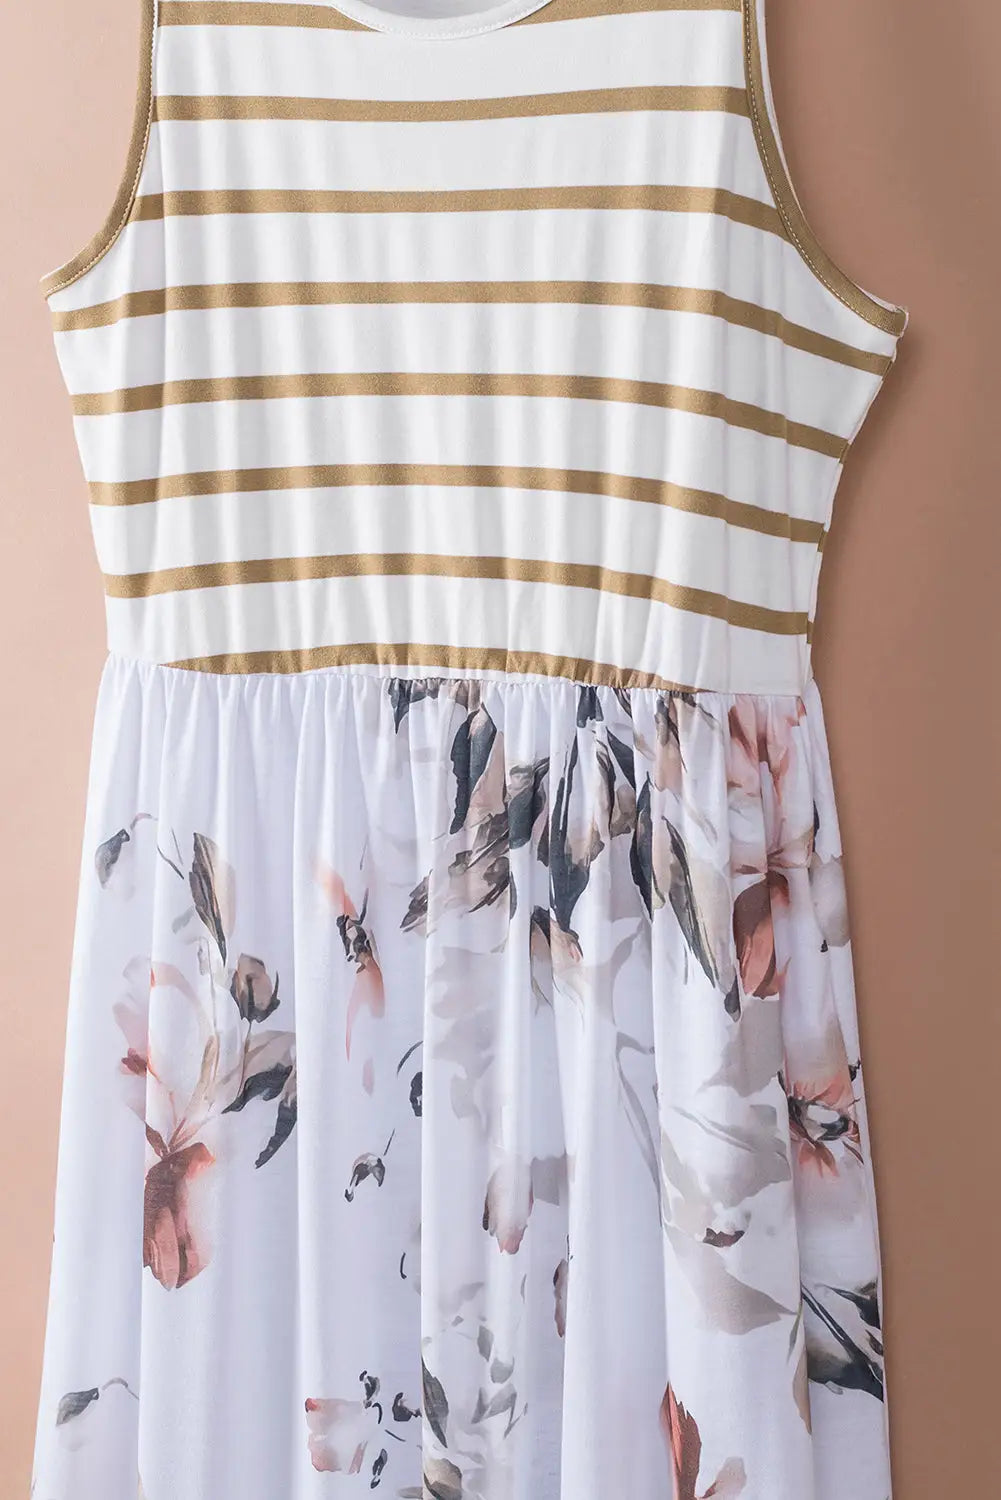 White striped floral print sleeveless maxi dress with pocket - dresses